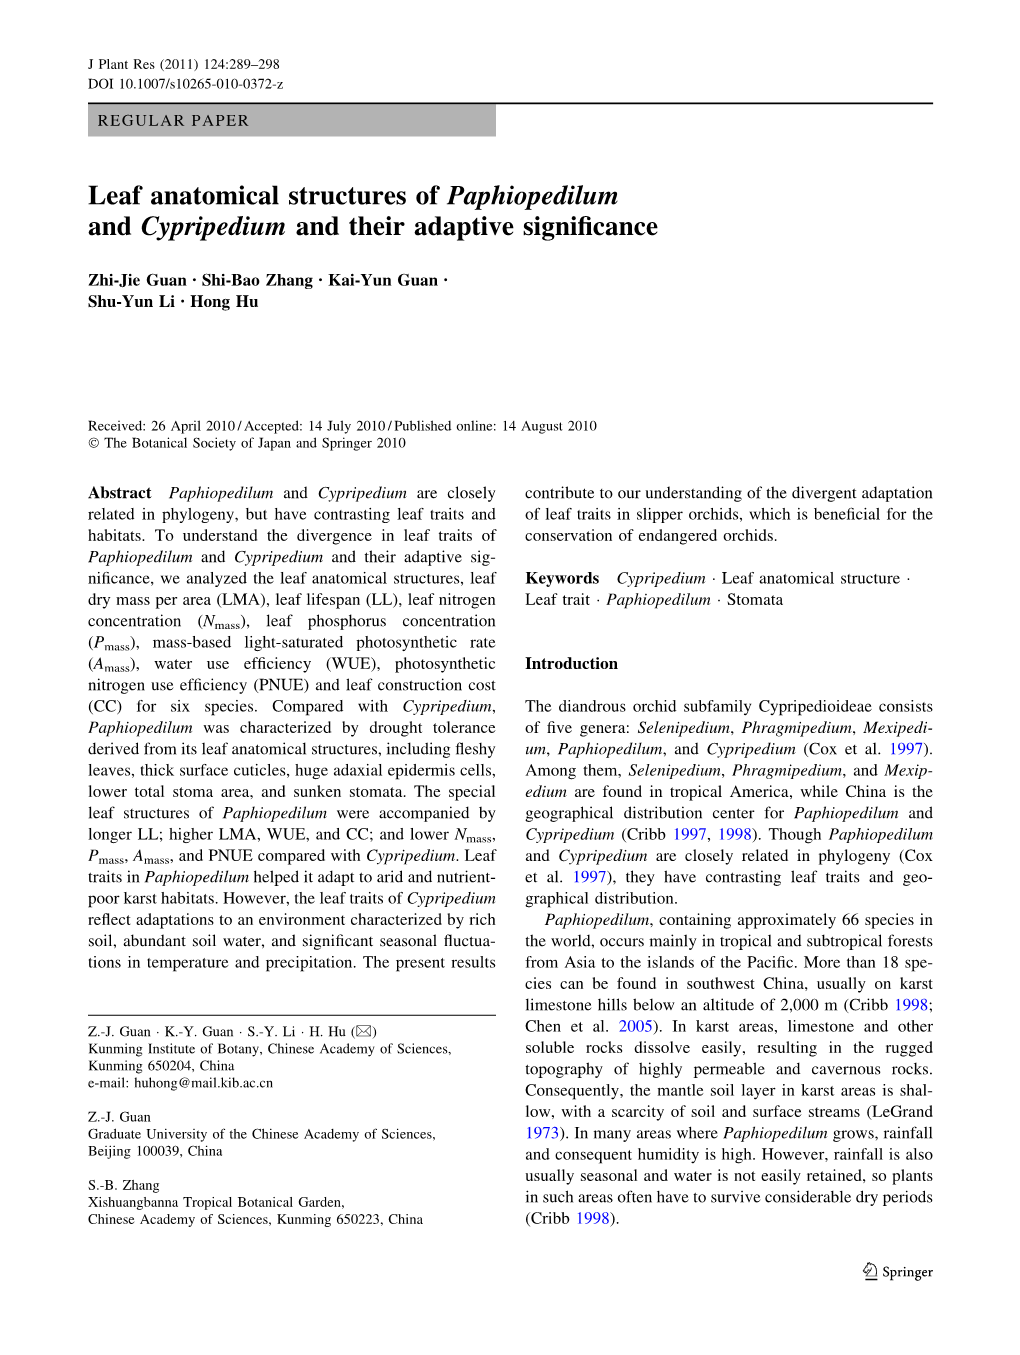 Leaf Anatomical Structures of Paphiopedilum and Cypripedium and Their Adaptive Signiﬁcance